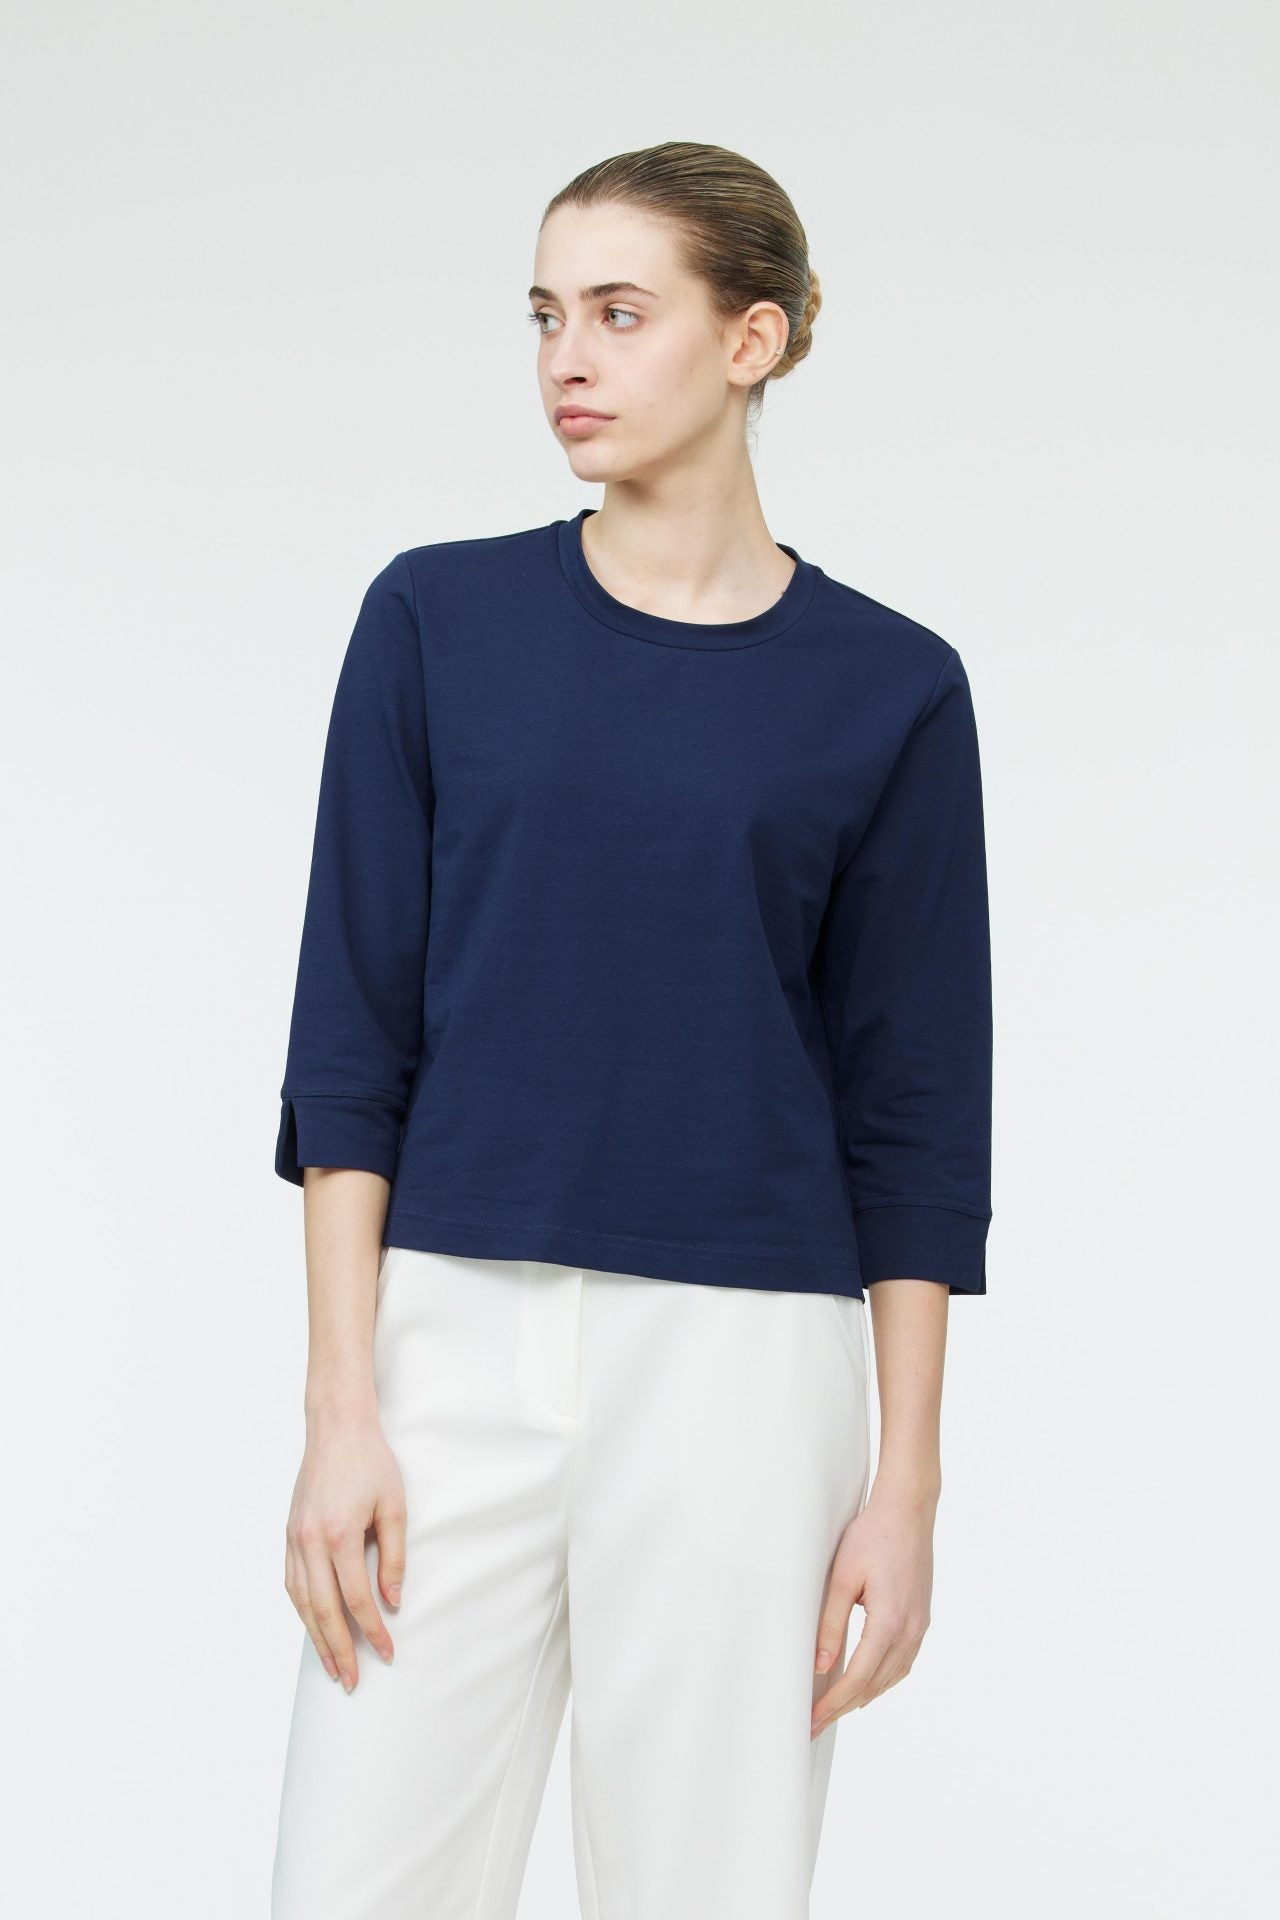 AT 10942 ROUND NECK LONG SLEEVE TOP NAVY